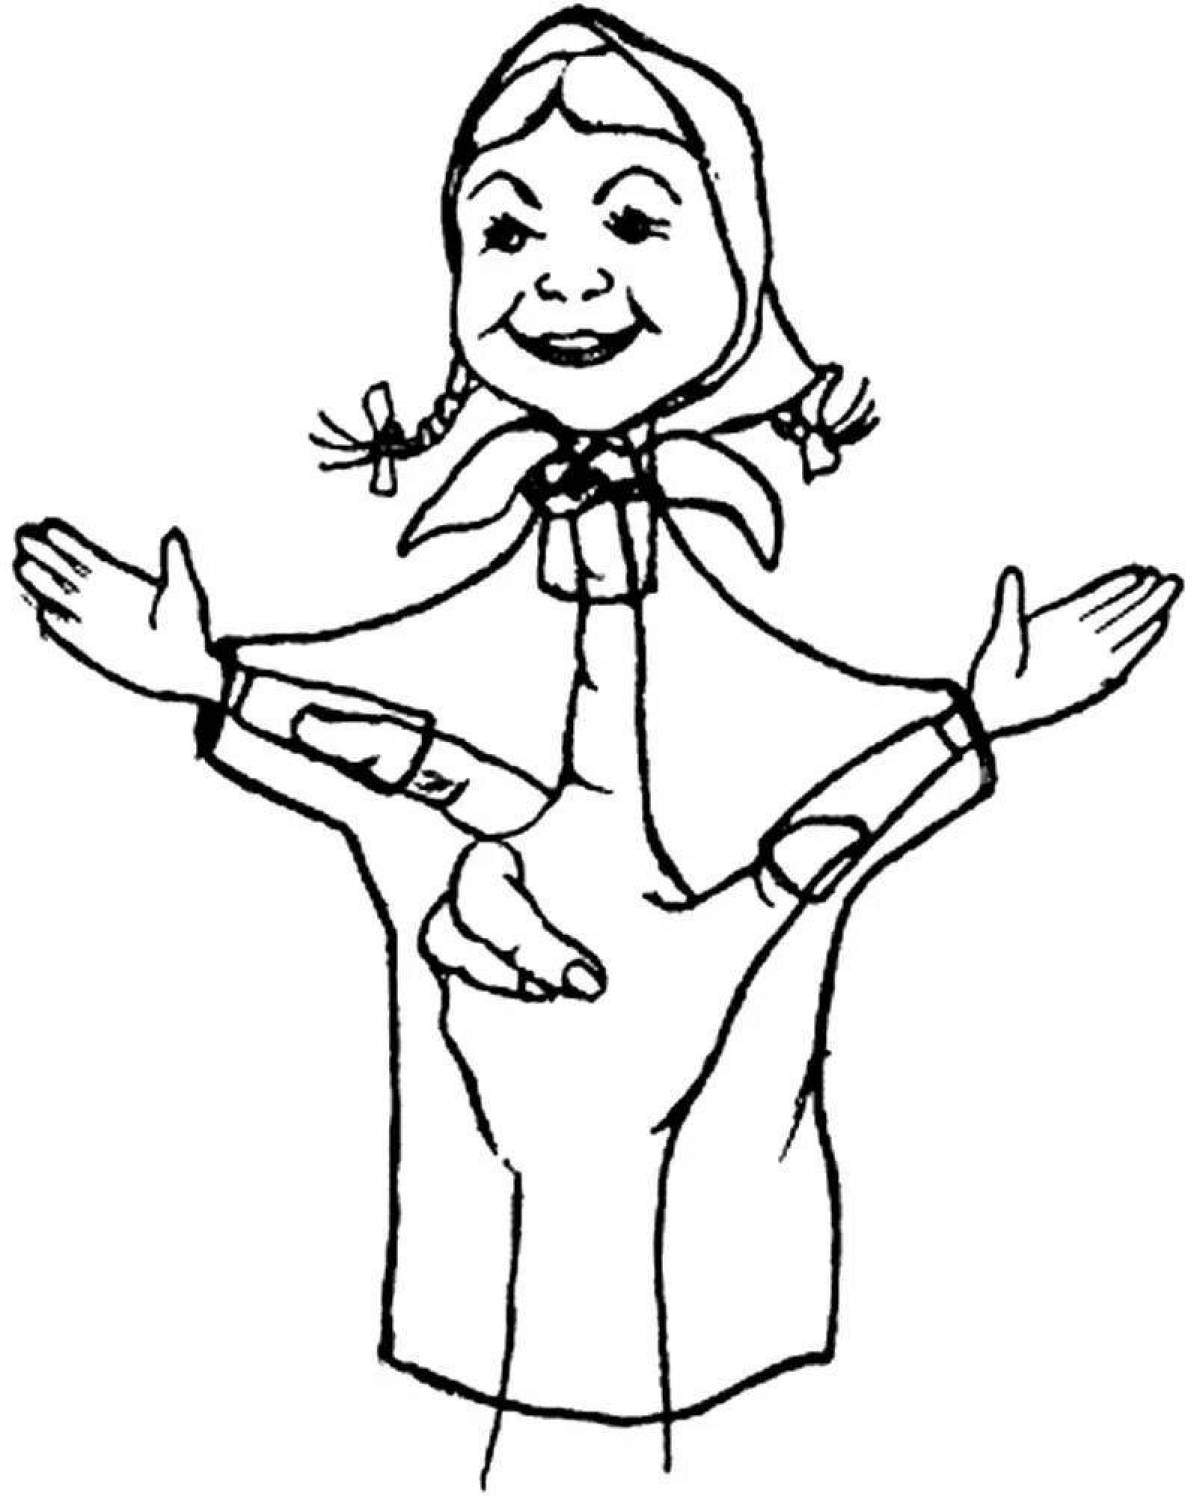 Coloring page amazing puppet theater